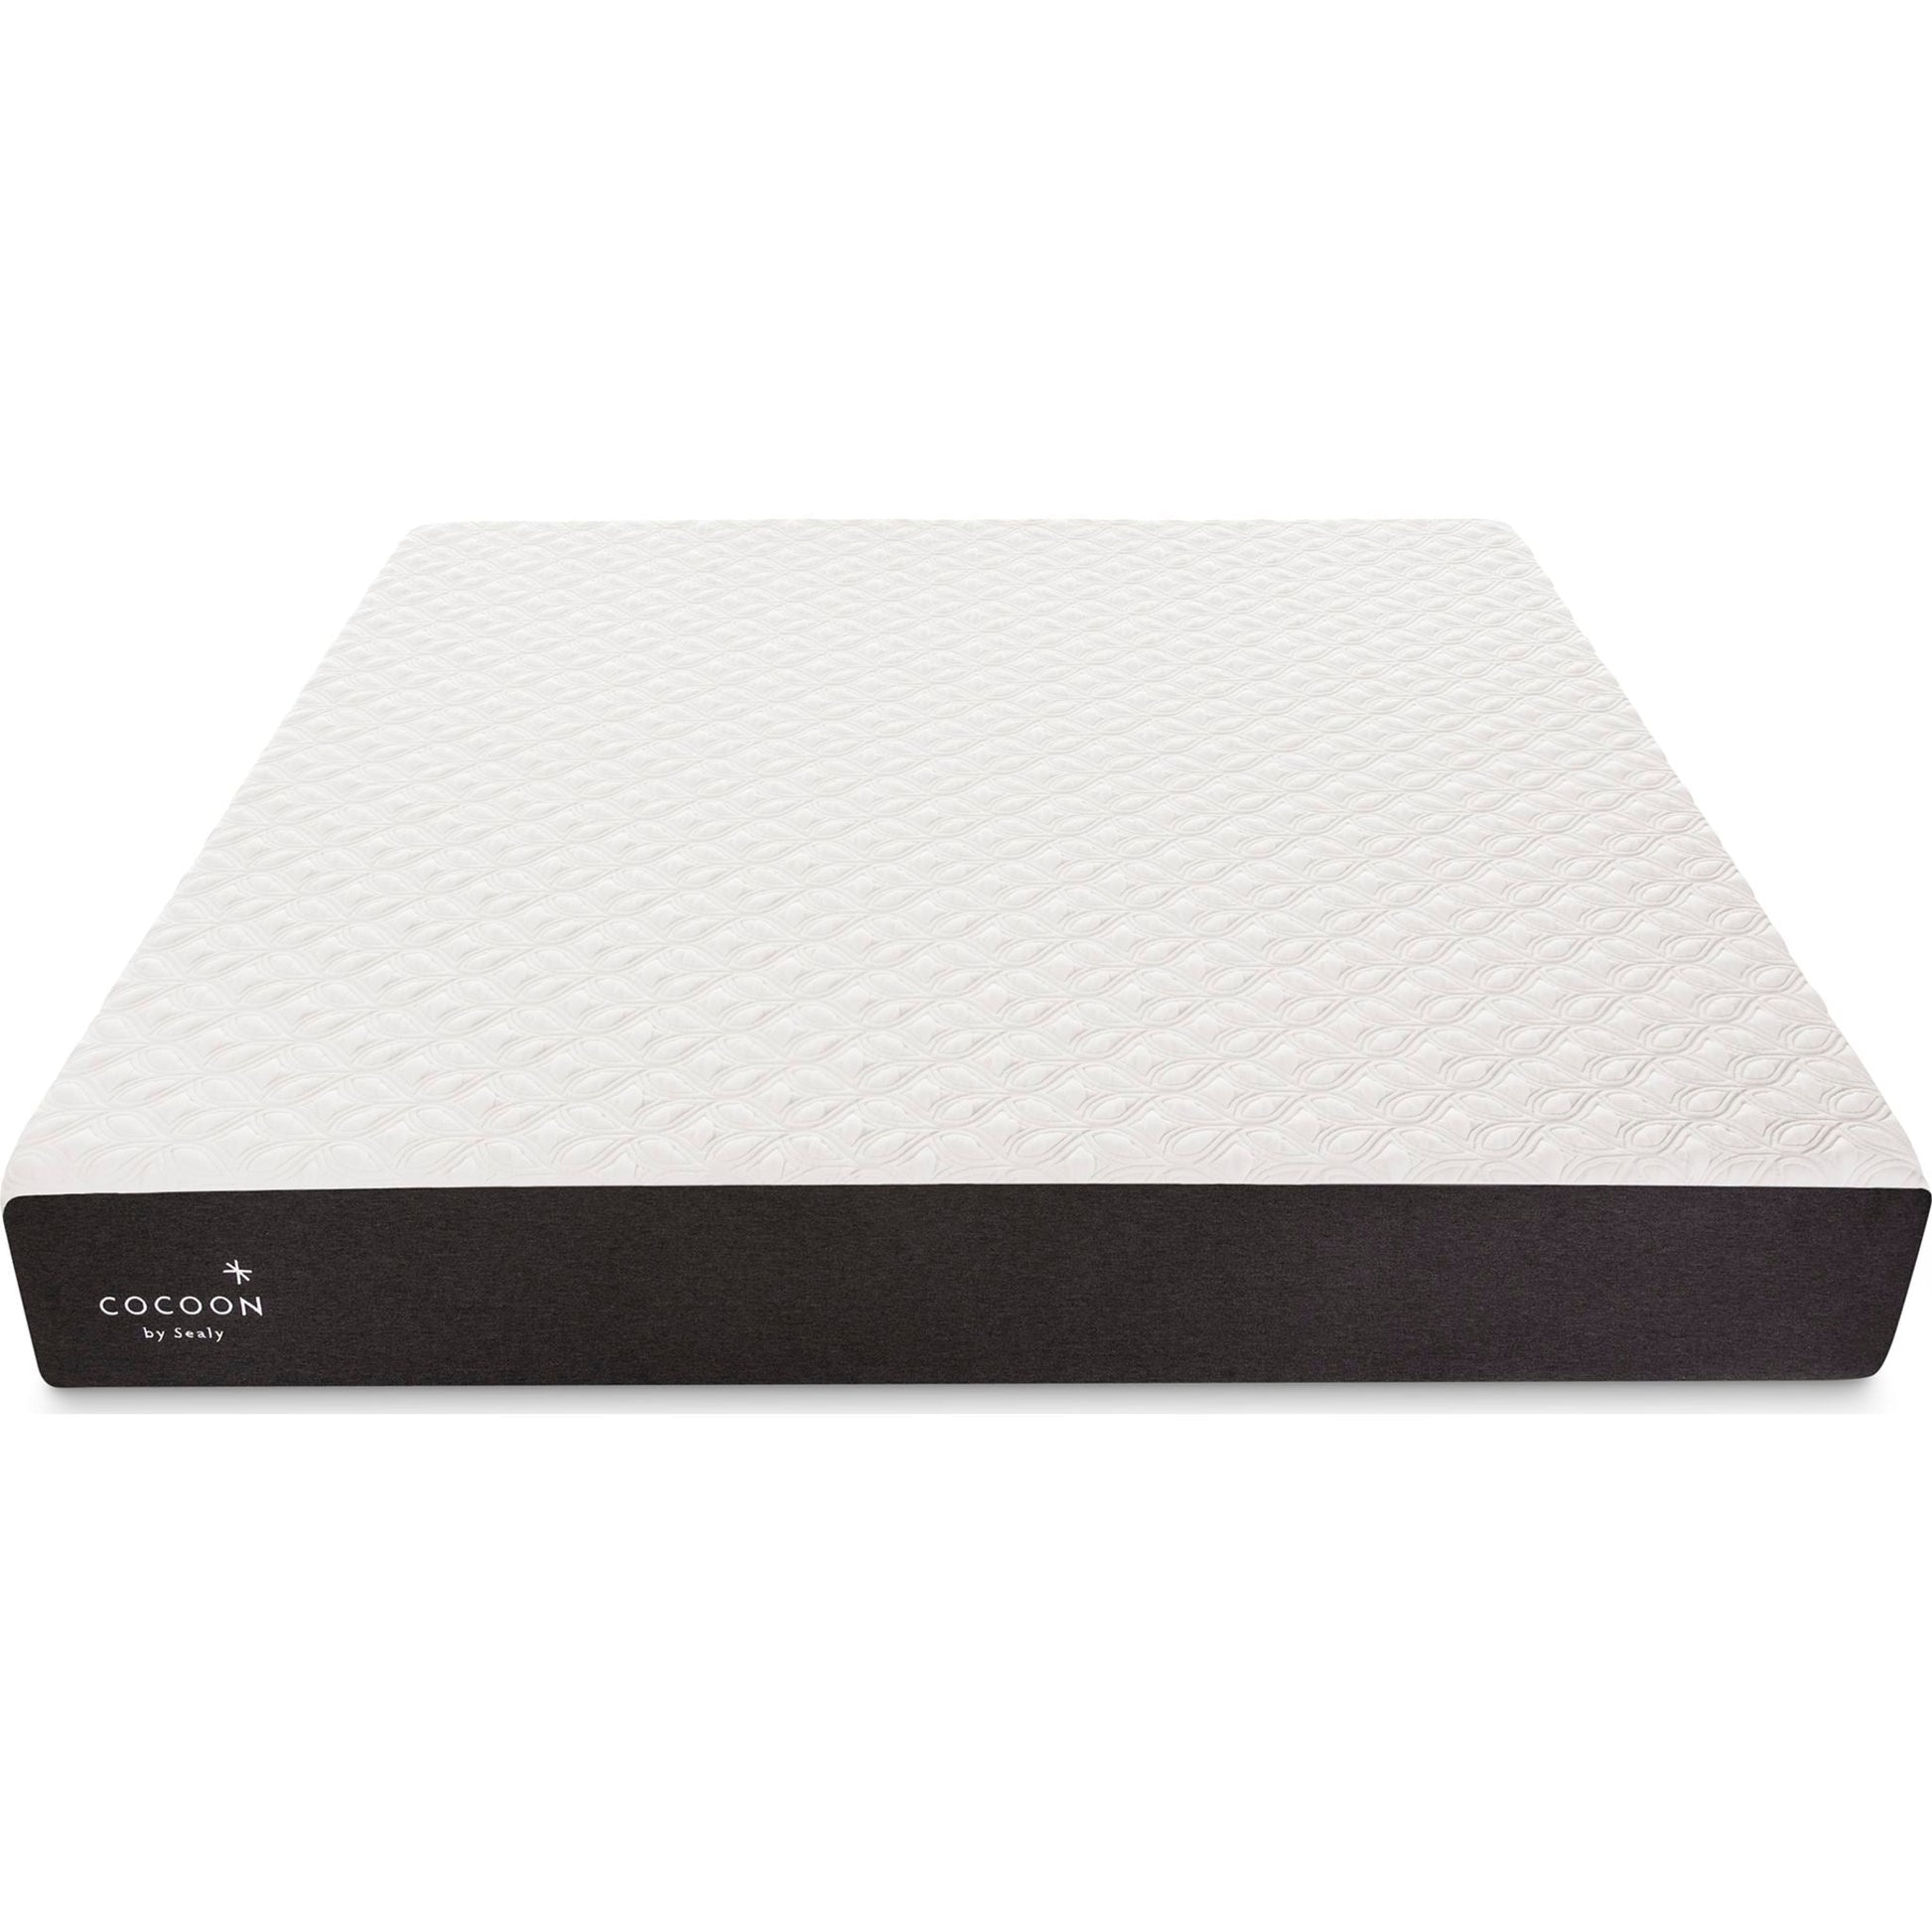 Sealy Cocoon by Sealy Classic 10" Firm Full Mattress